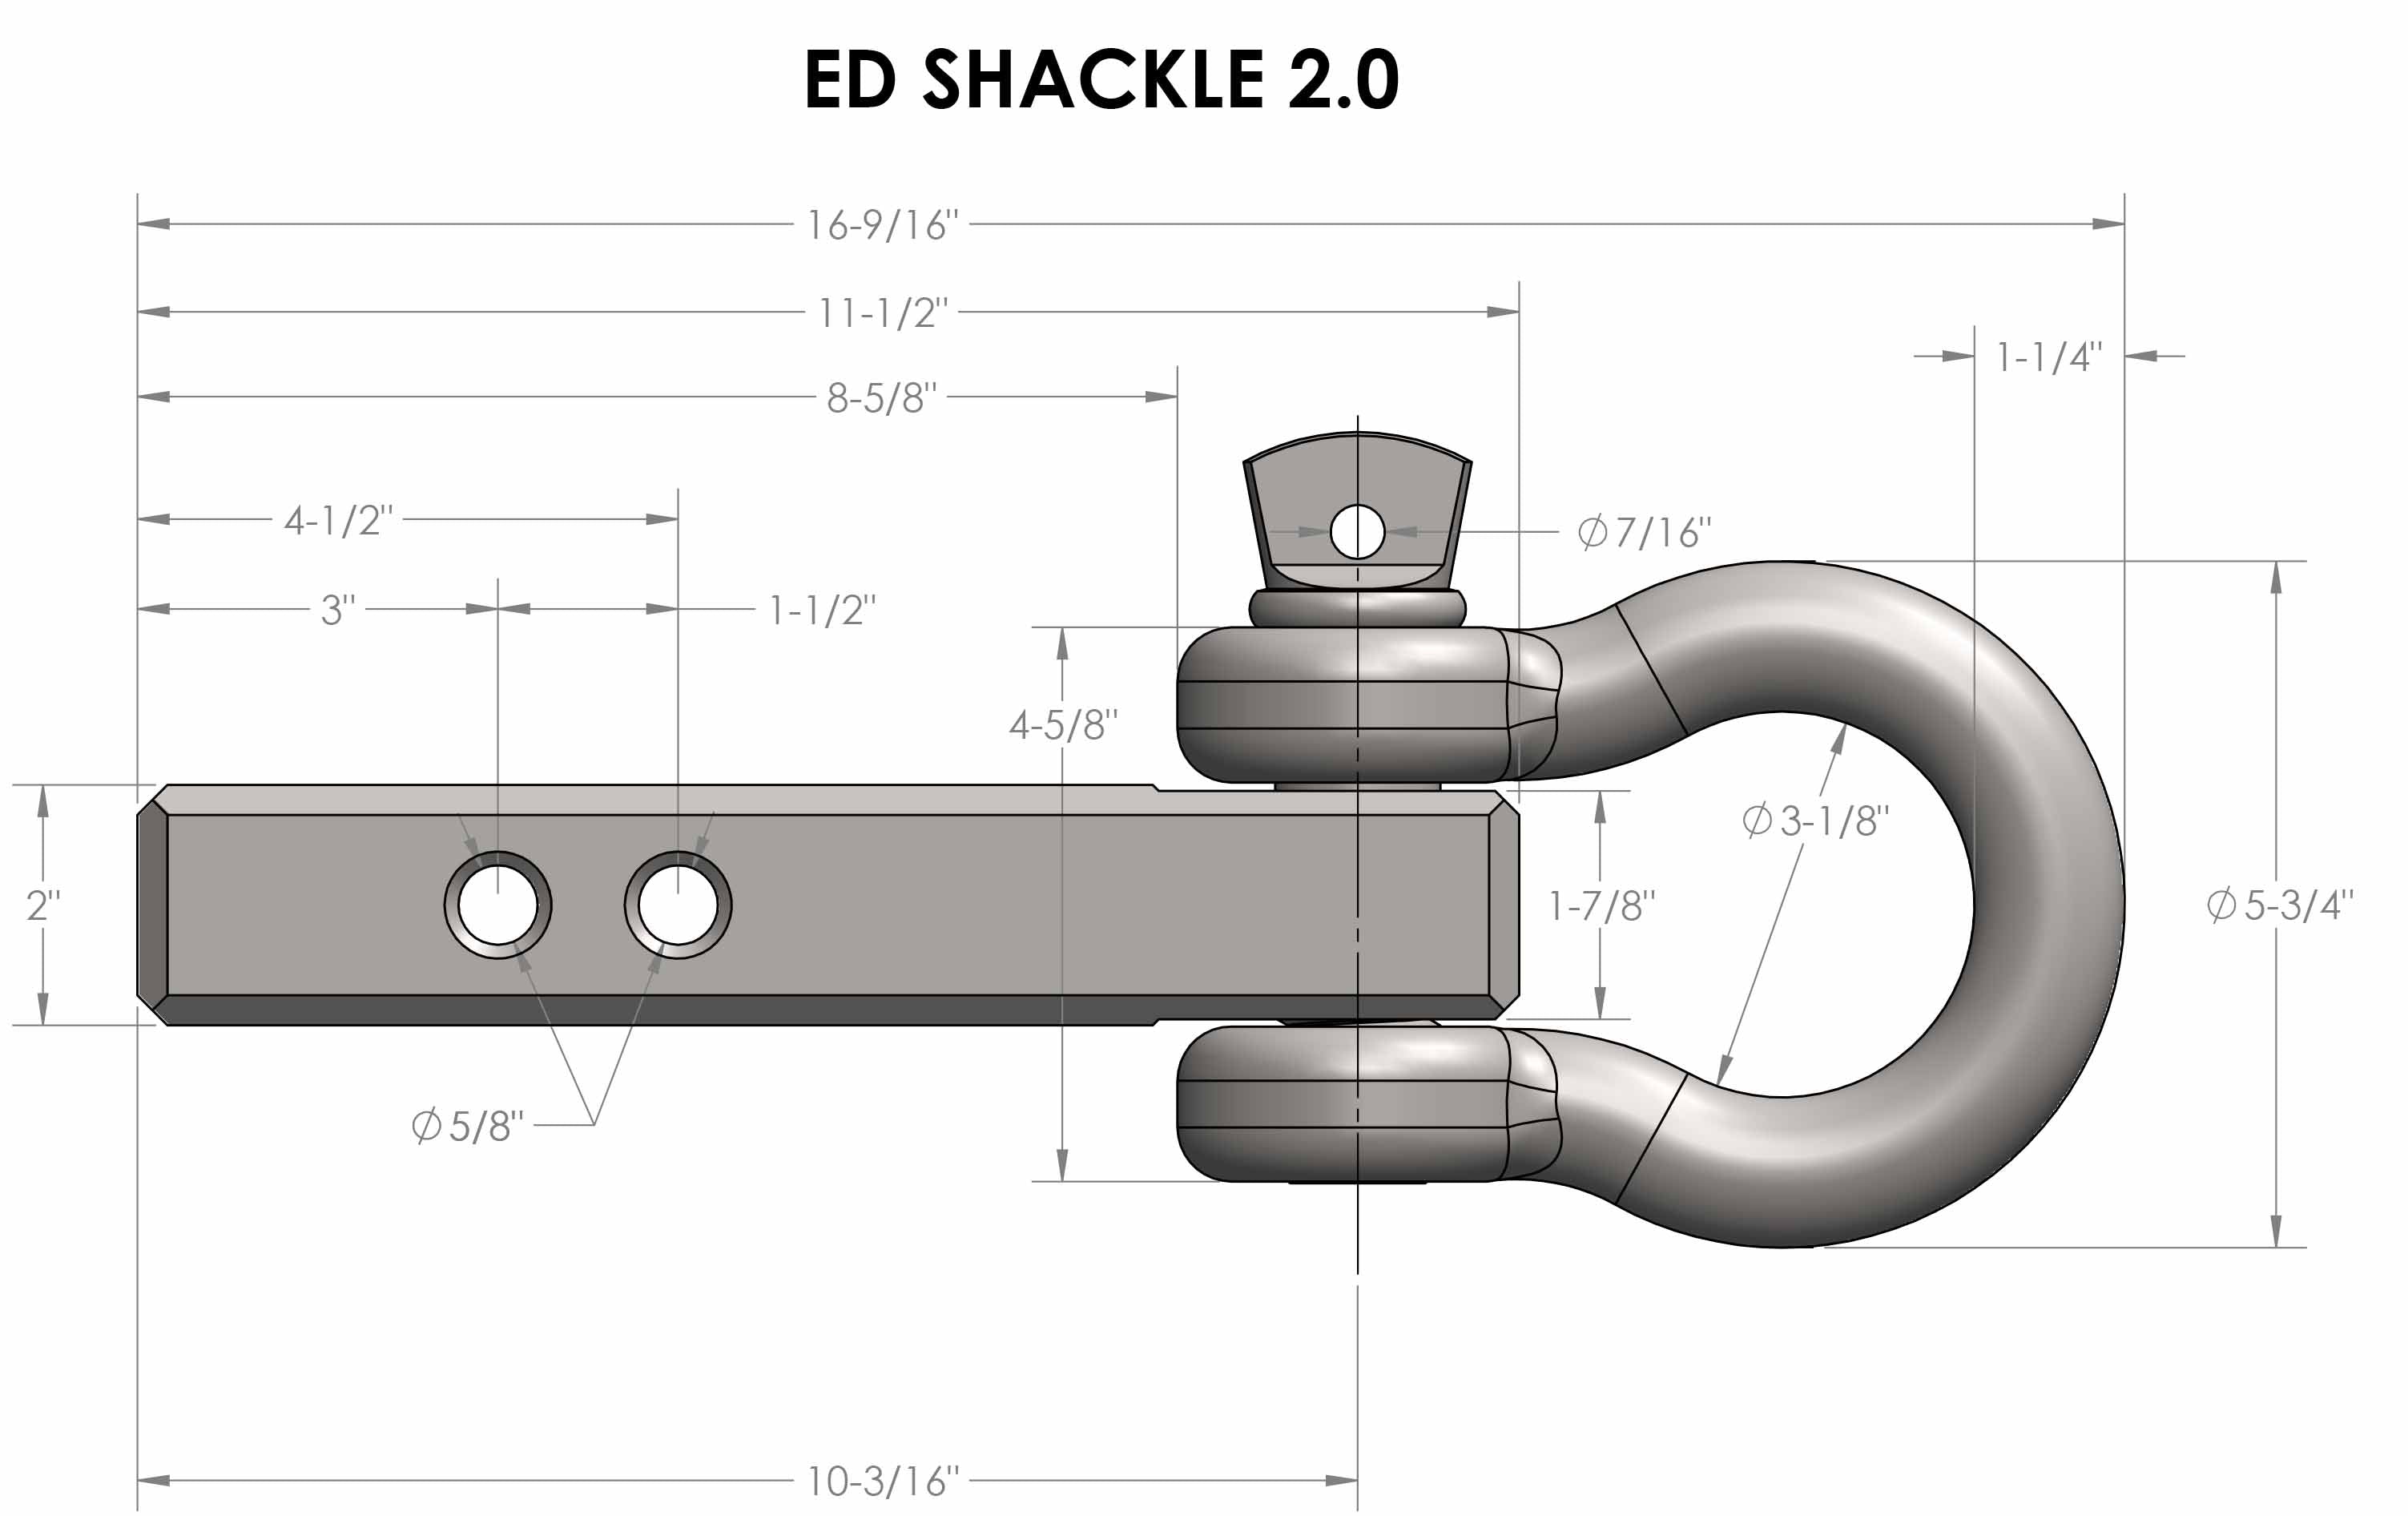 BulletProof 2.0" Extreme Duty Receiver Shackle Design Specification